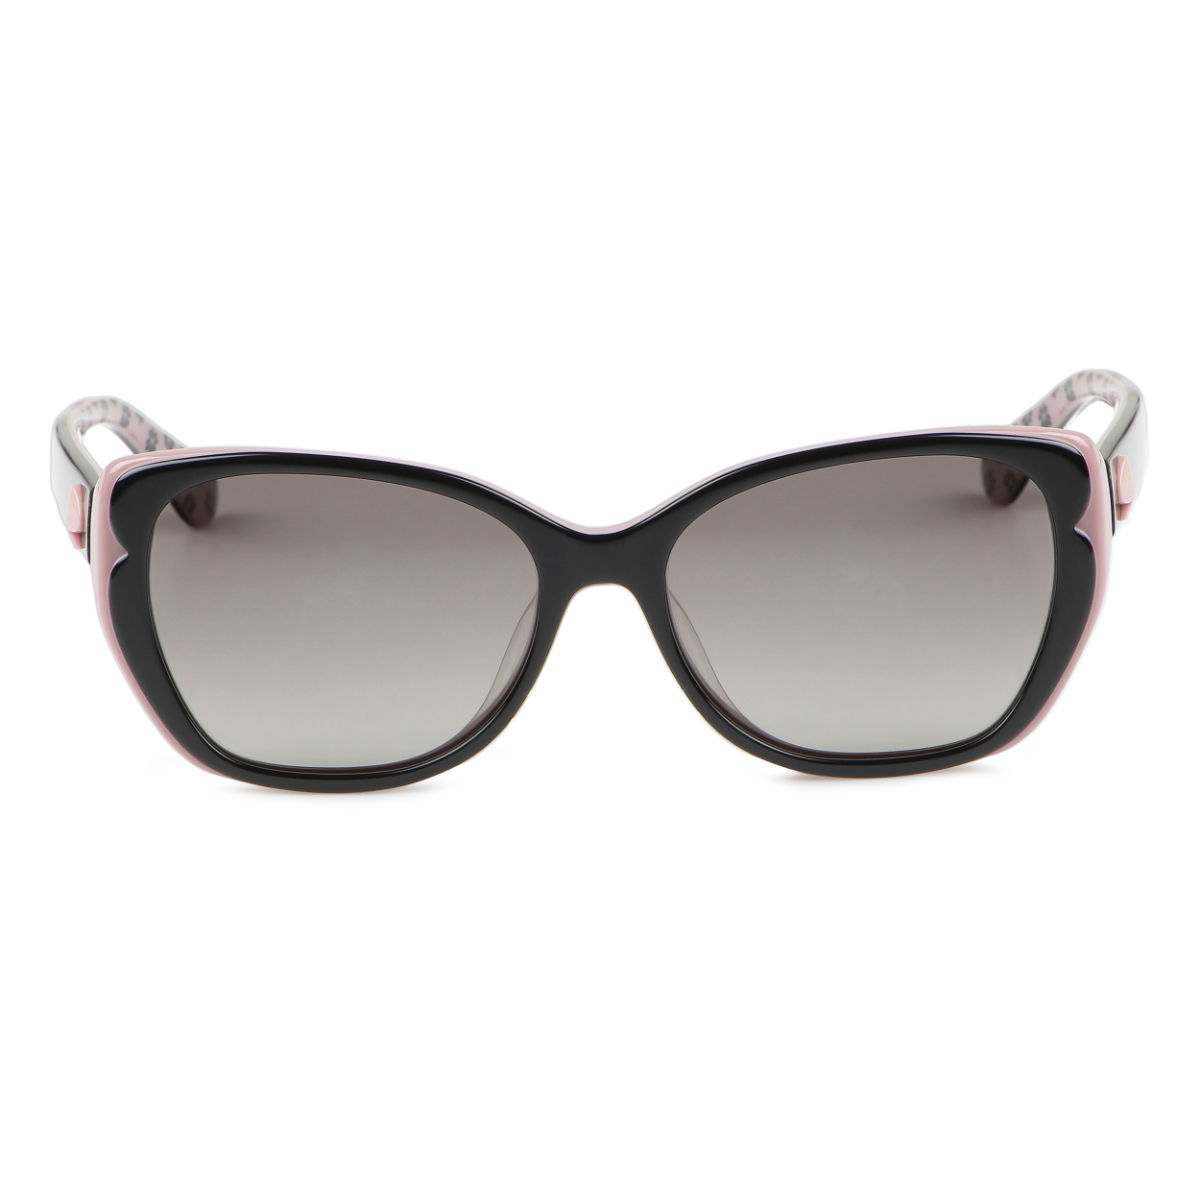 Kate Spade AUGUSTA/G/S 3H2 54 WJ Woman Square Sunglass: Buy Kate Spade  AUGUSTA/G/S 3H2 54 WJ Woman Square Sunglass Online at Best Price in India |  Nykaa